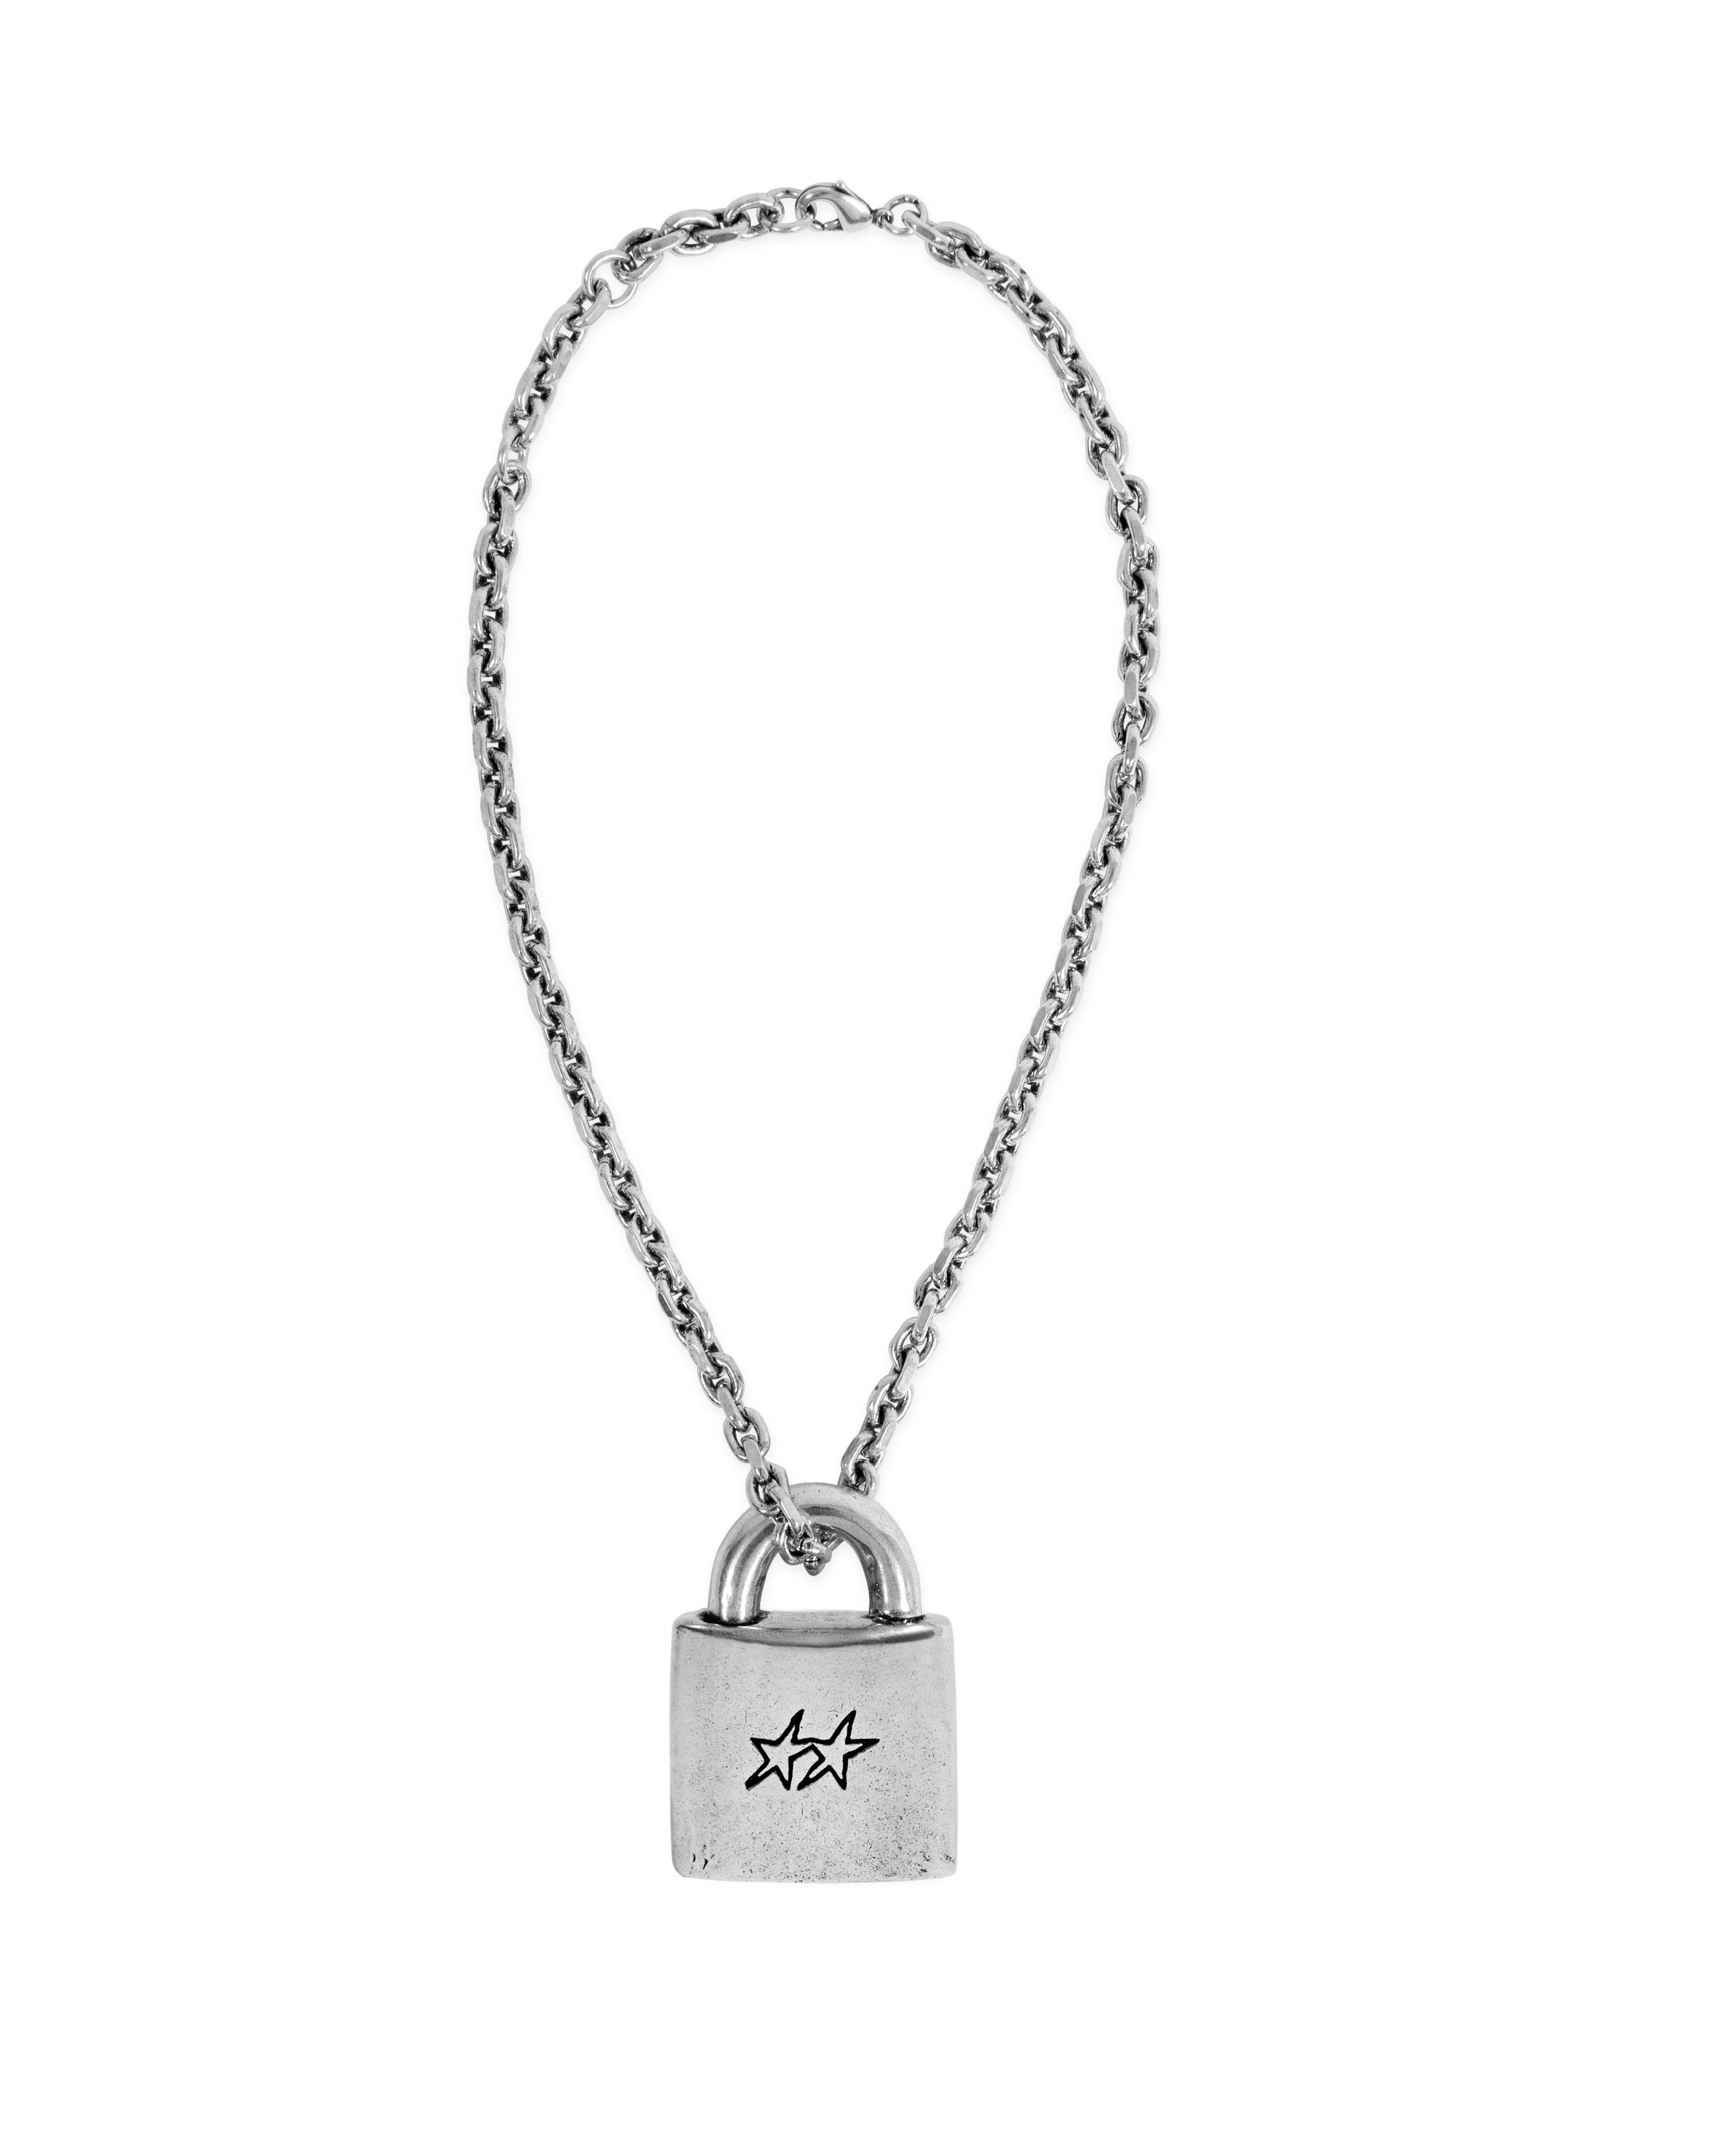 Lv lock necklace – The Southern Gypsy Bags